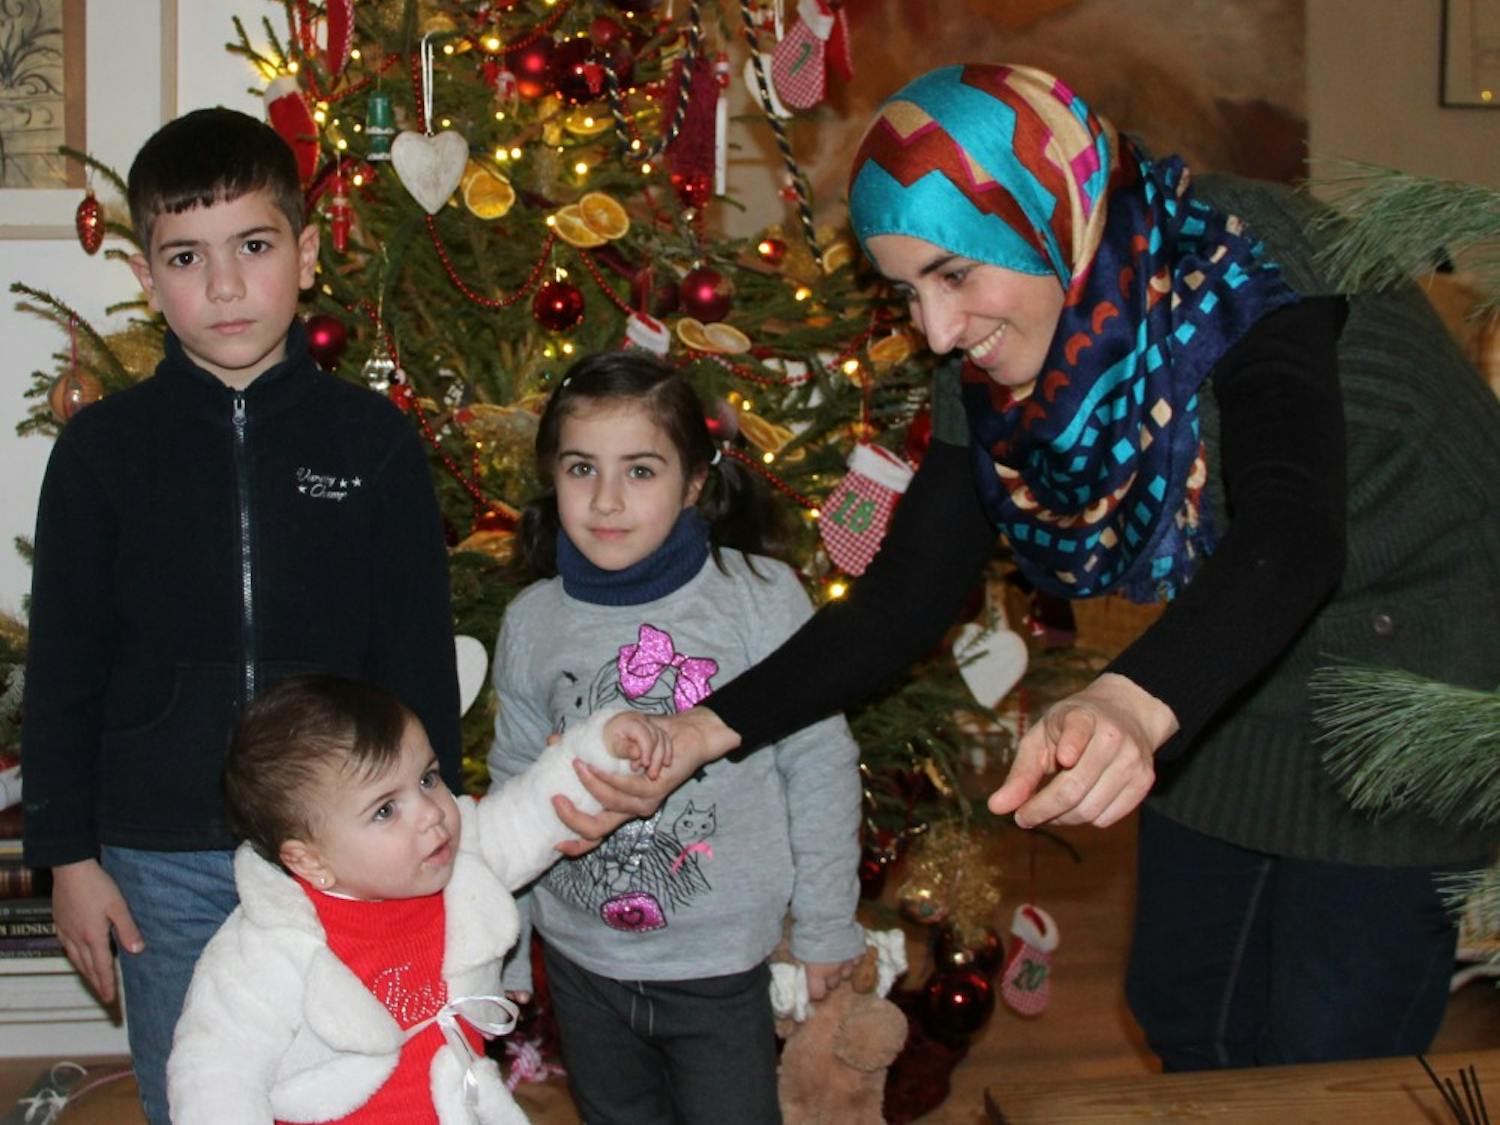 Lubna&nbsp;Albalkhi (right)&nbsp;and her children&nbsp;Mohammed, Bisan and&nbsp;Leen in Berlin&nbsp;around December 2015.&nbsp;The Albalkhi family, including Lubna's husband&nbsp;Sarhan,&nbsp;fled Syria in October.&nbsp;A German woman has helped them with their paperwork and to get jobs and homes in Berlin. She believes if every person helped one family, the refugee crisis would be over.&nbsp;